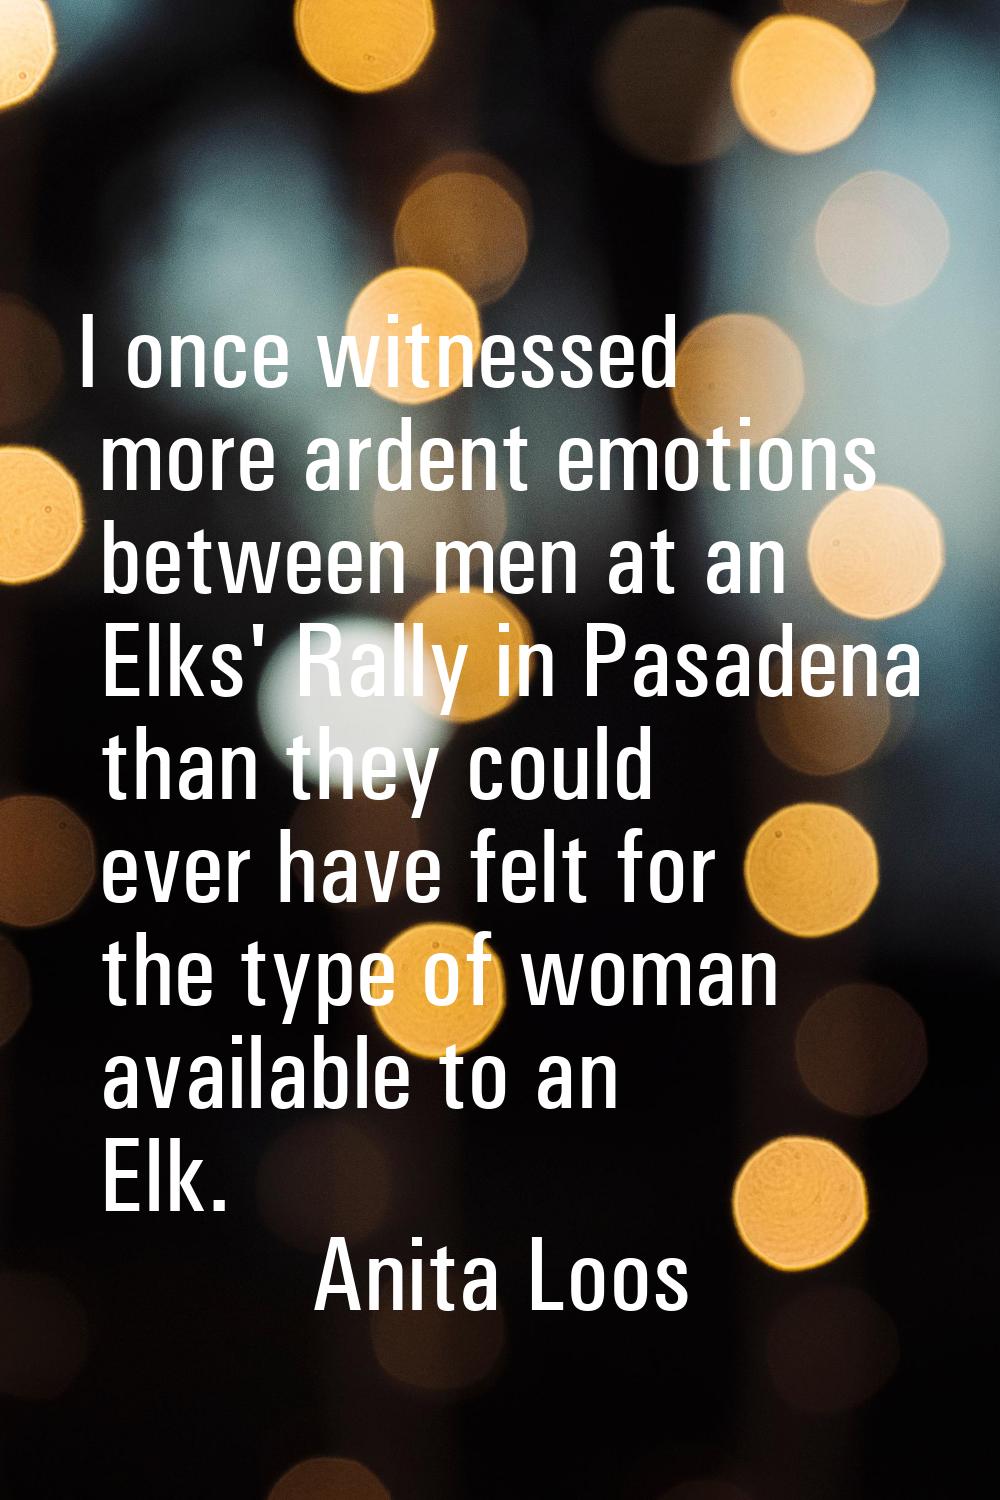 I once witnessed more ardent emotions between men at an Elks' Rally in Pasadena than they could eve